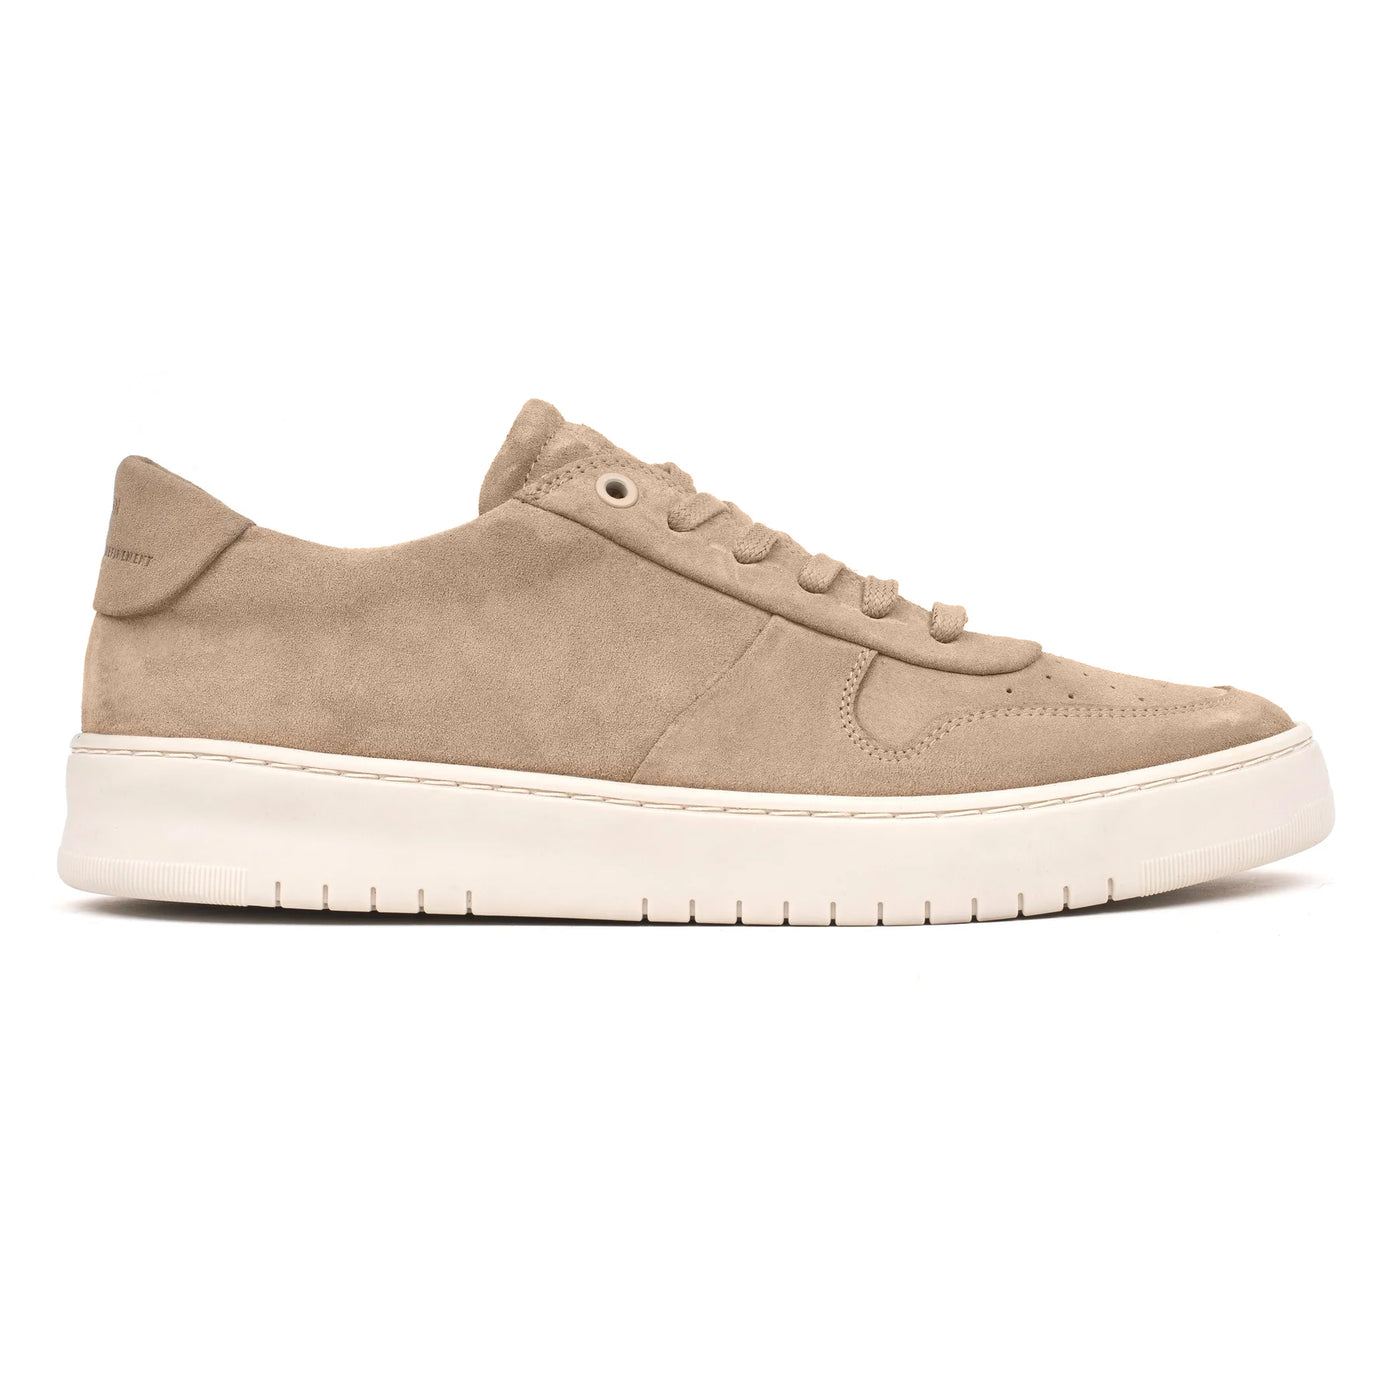 BENNET SONDER EIGHT Sand (Lt.Taupe) Leather Suede - HINSON